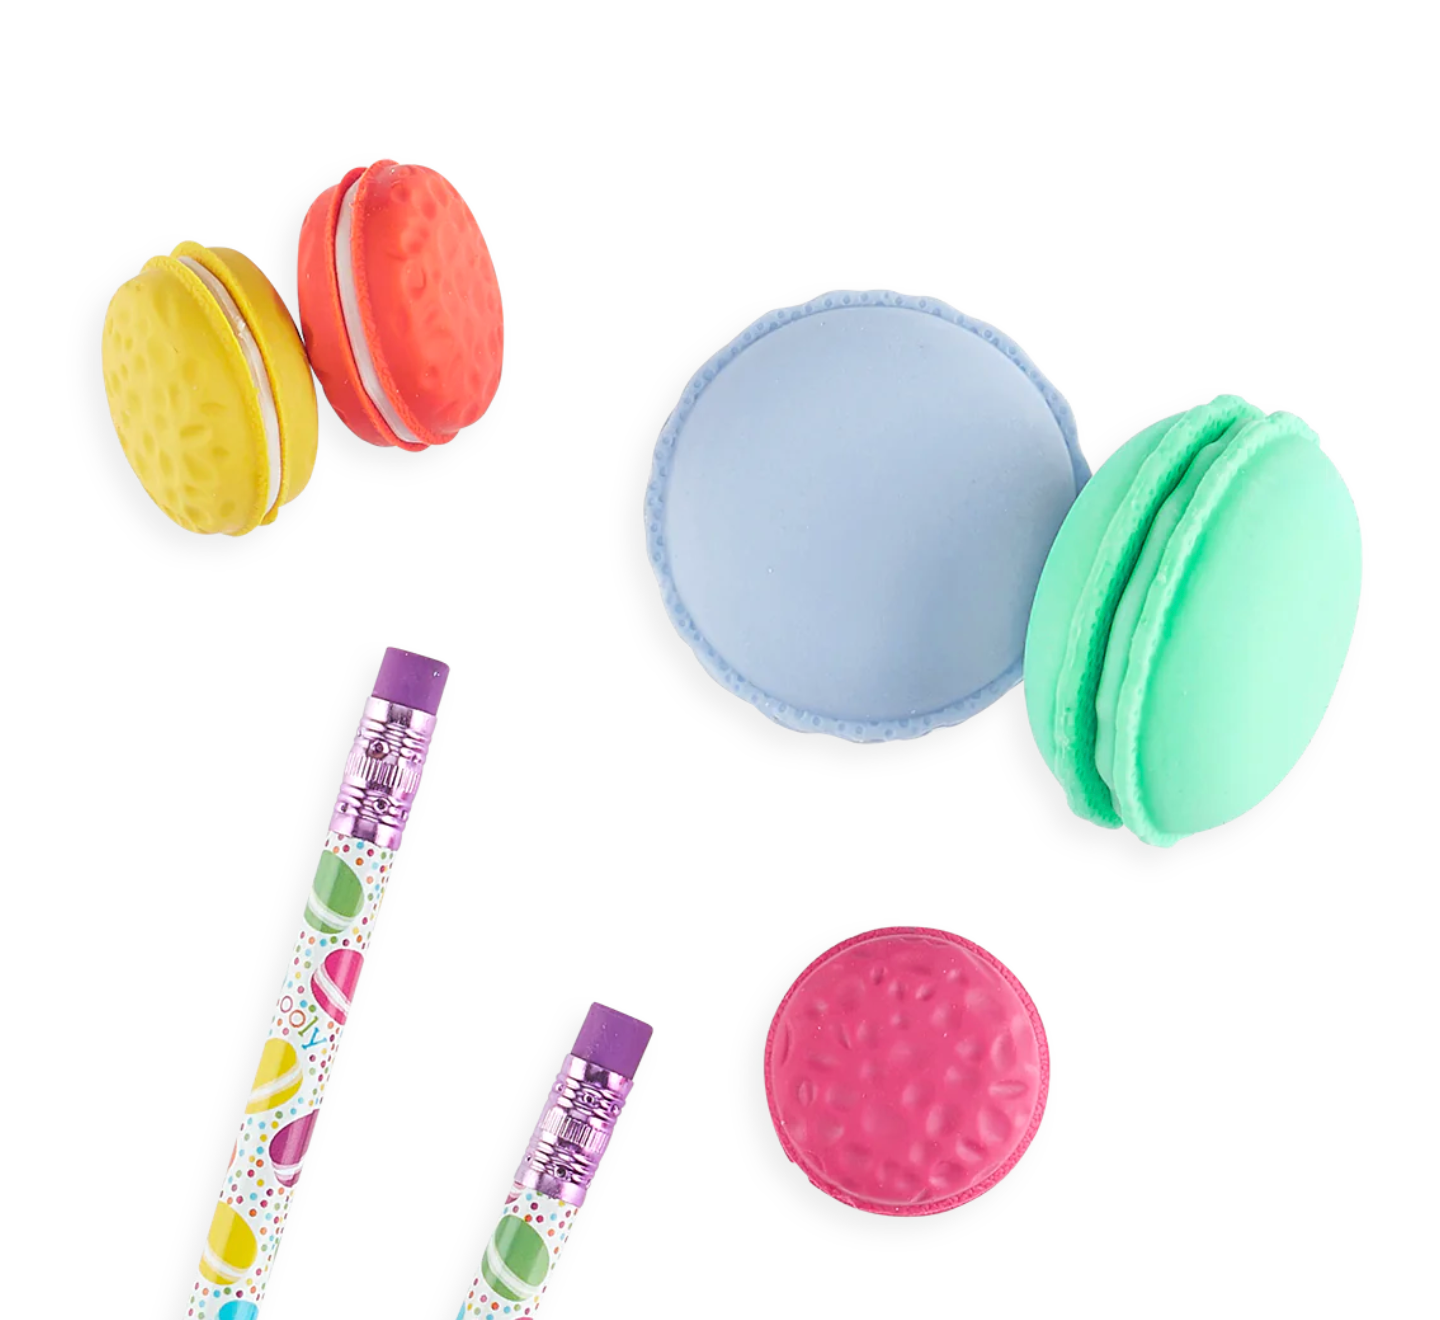 Le Macaron Pâtisserie Scented Erasers - Set of 5